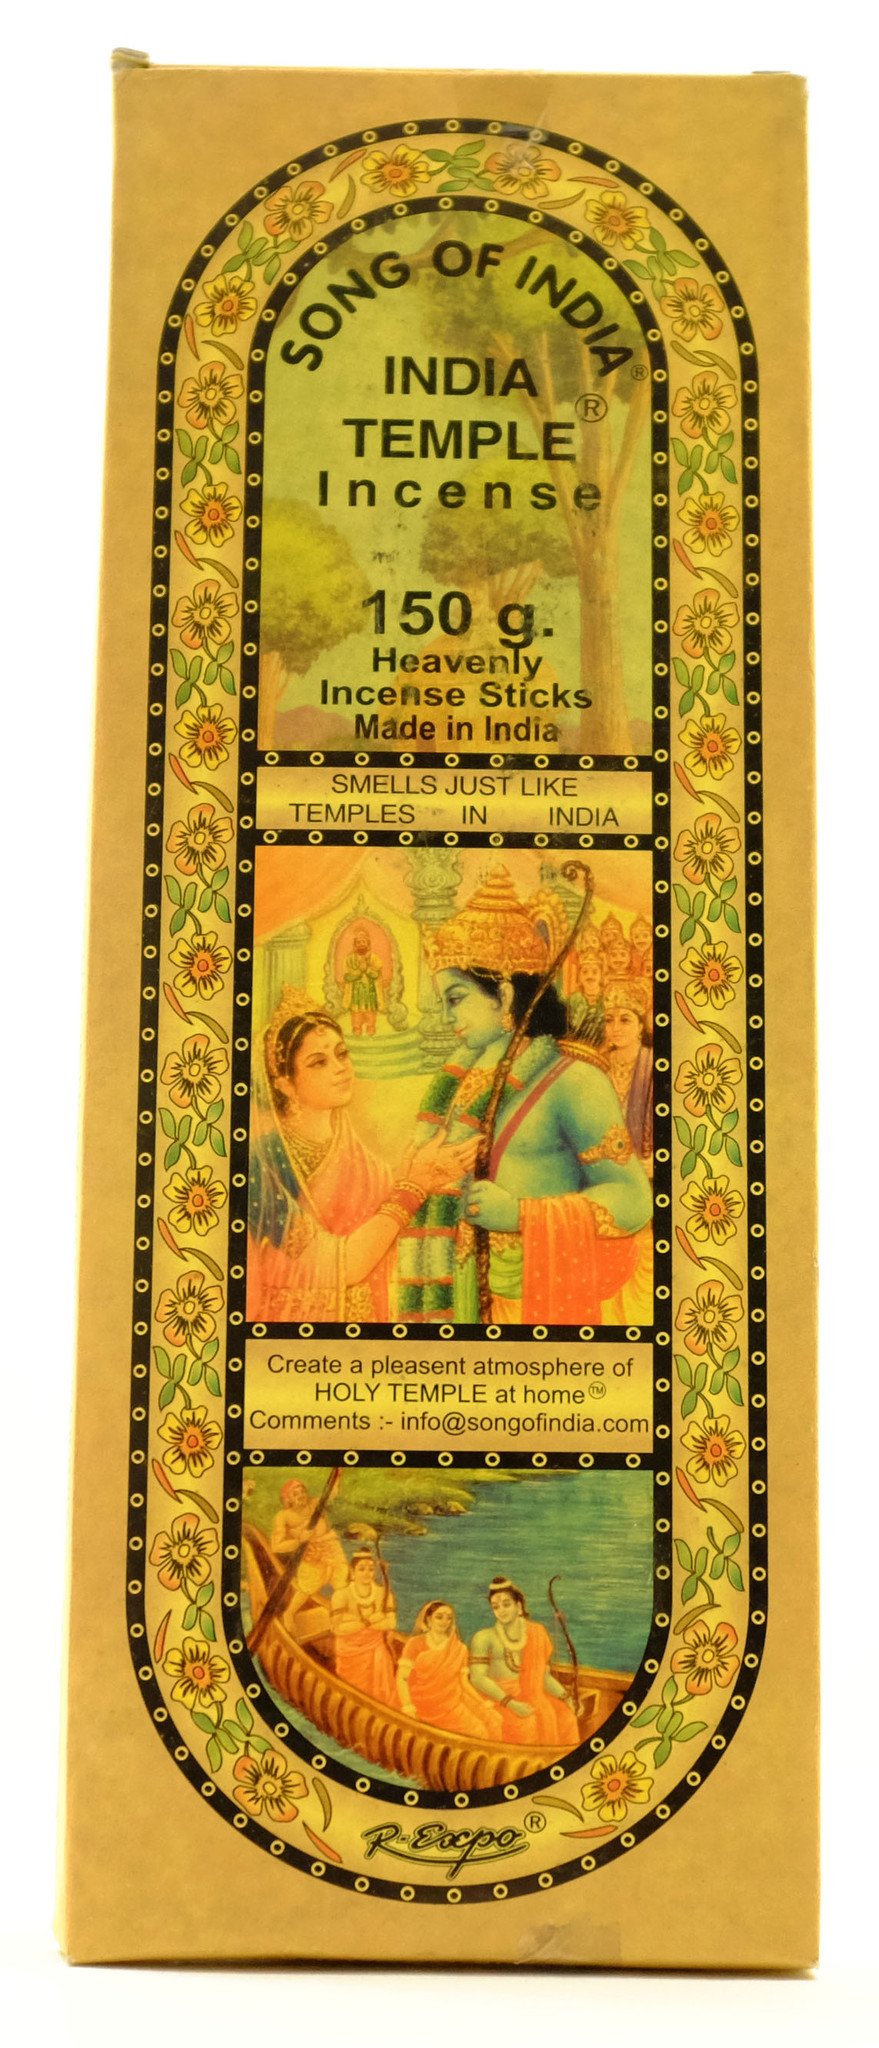 India Temple Incense & Oil Collection